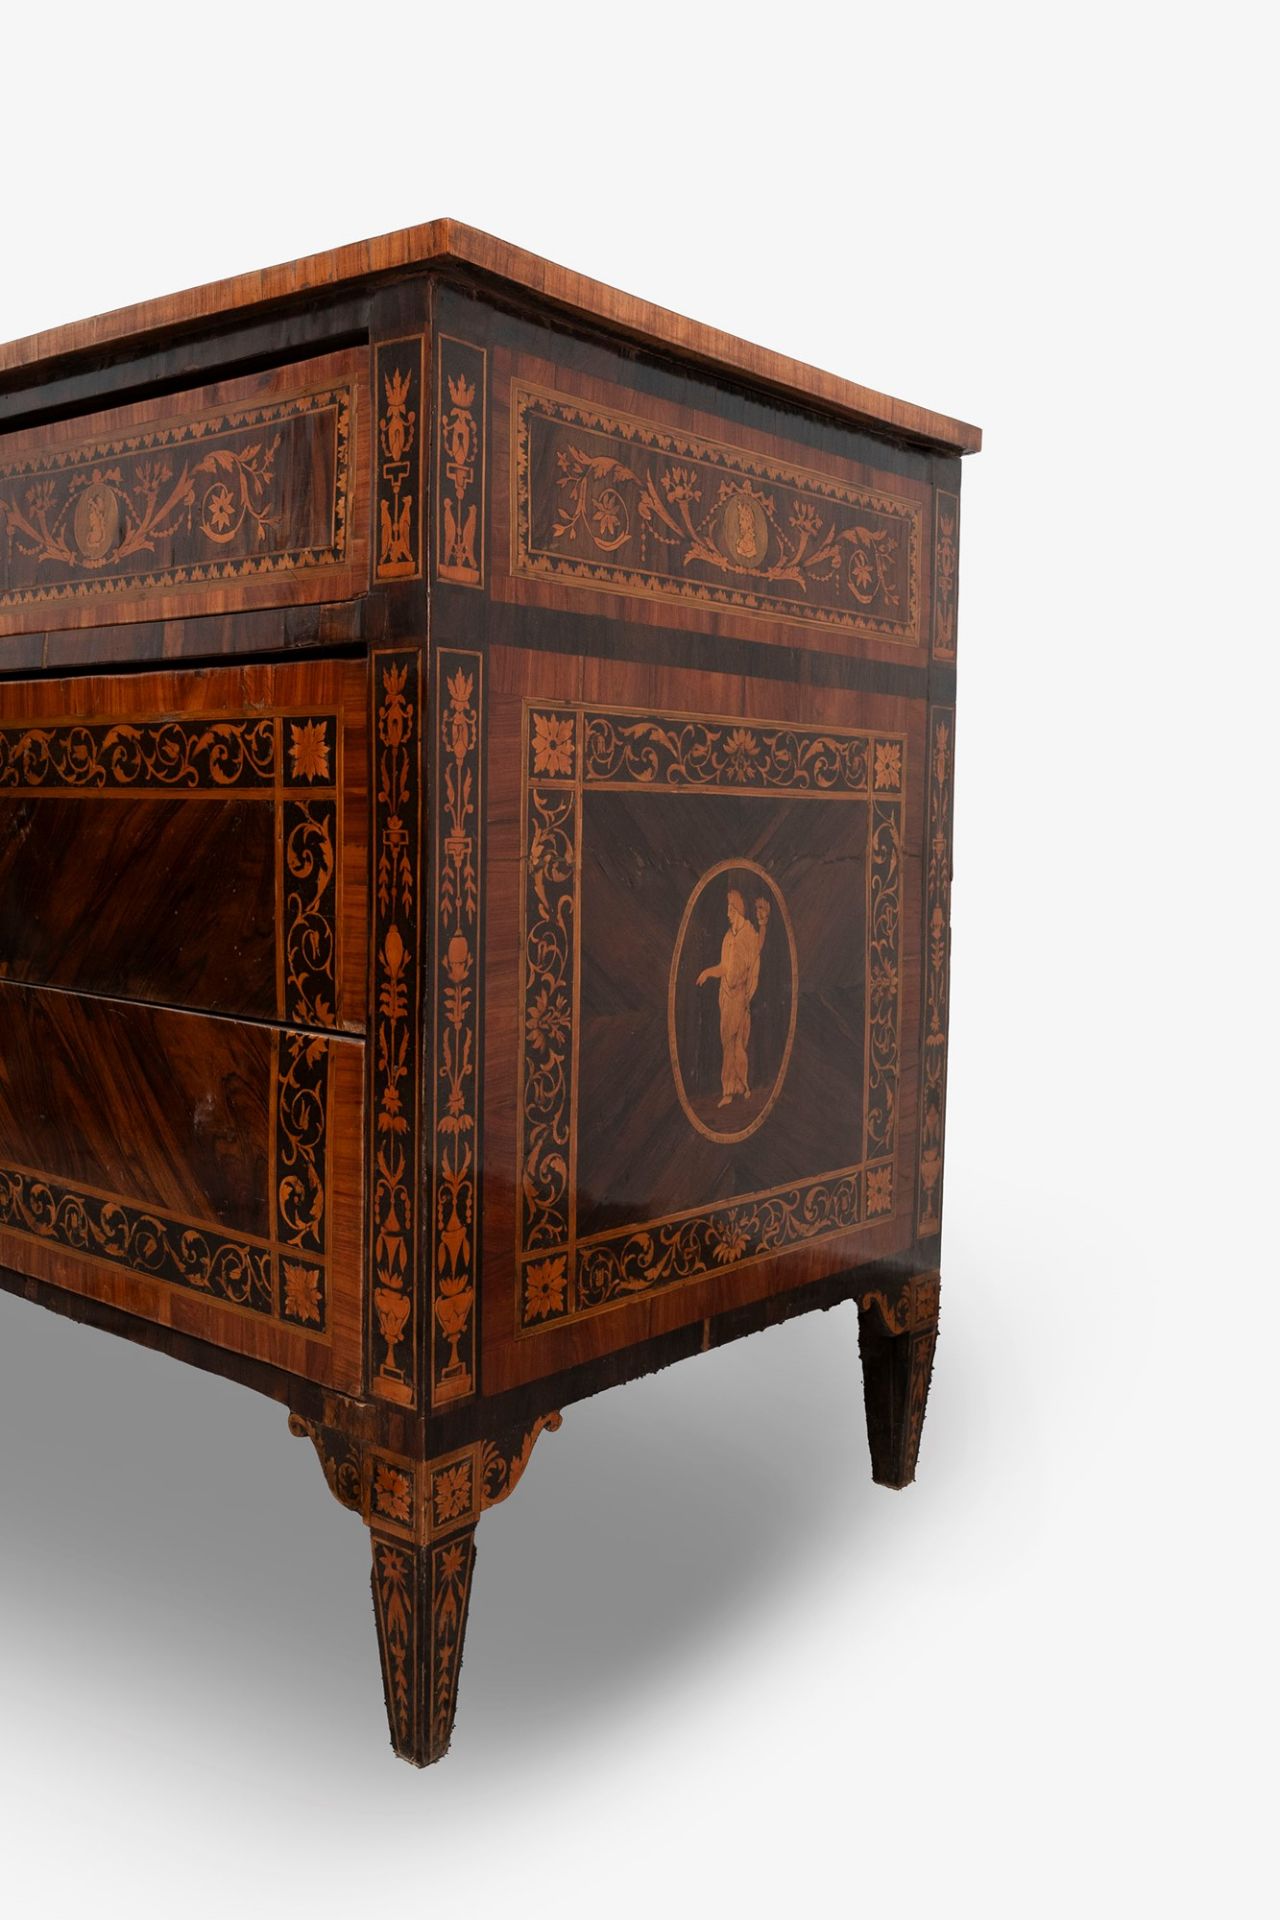 Beautiful Louis XVI commode elegantly inlaid in various woods, Lombardy 18th century - Image 4 of 6